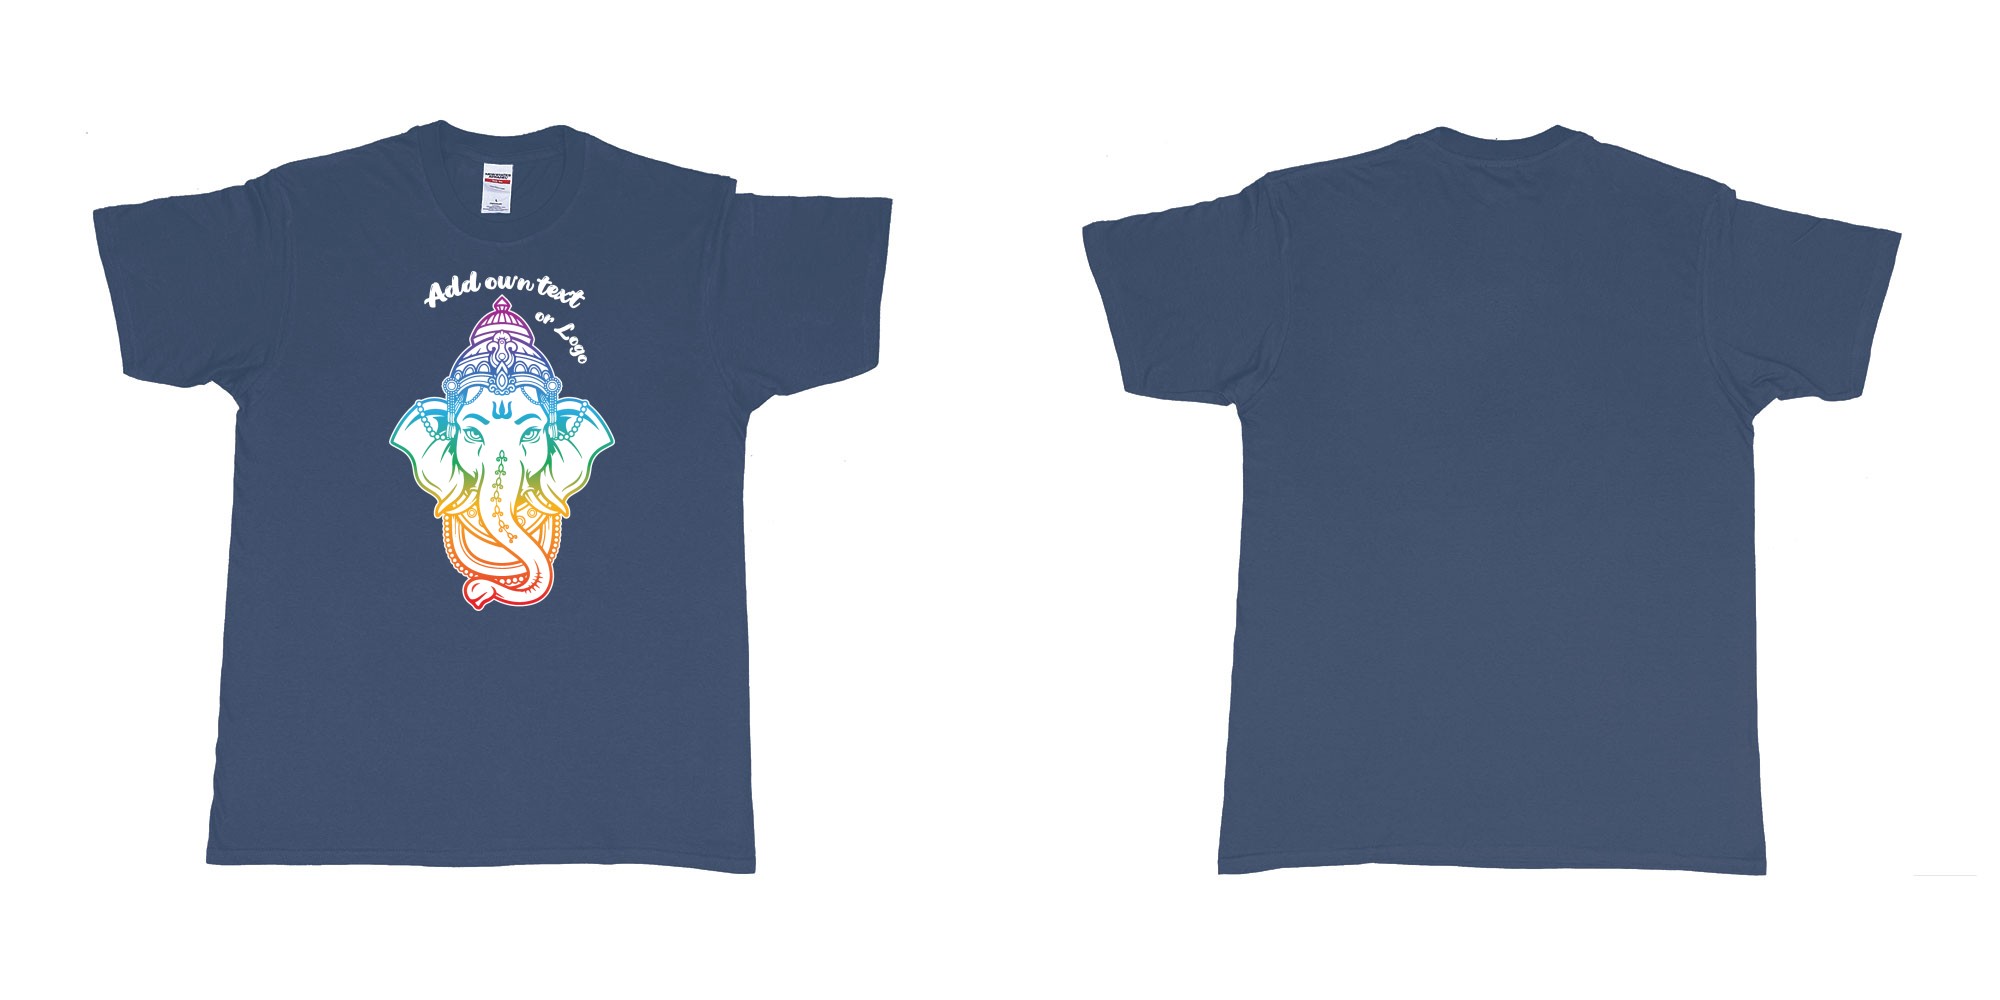 Custom tshirt design ganesha rainbow custom printing in fabric color navy choice your own text made in Bali by The Pirate Way